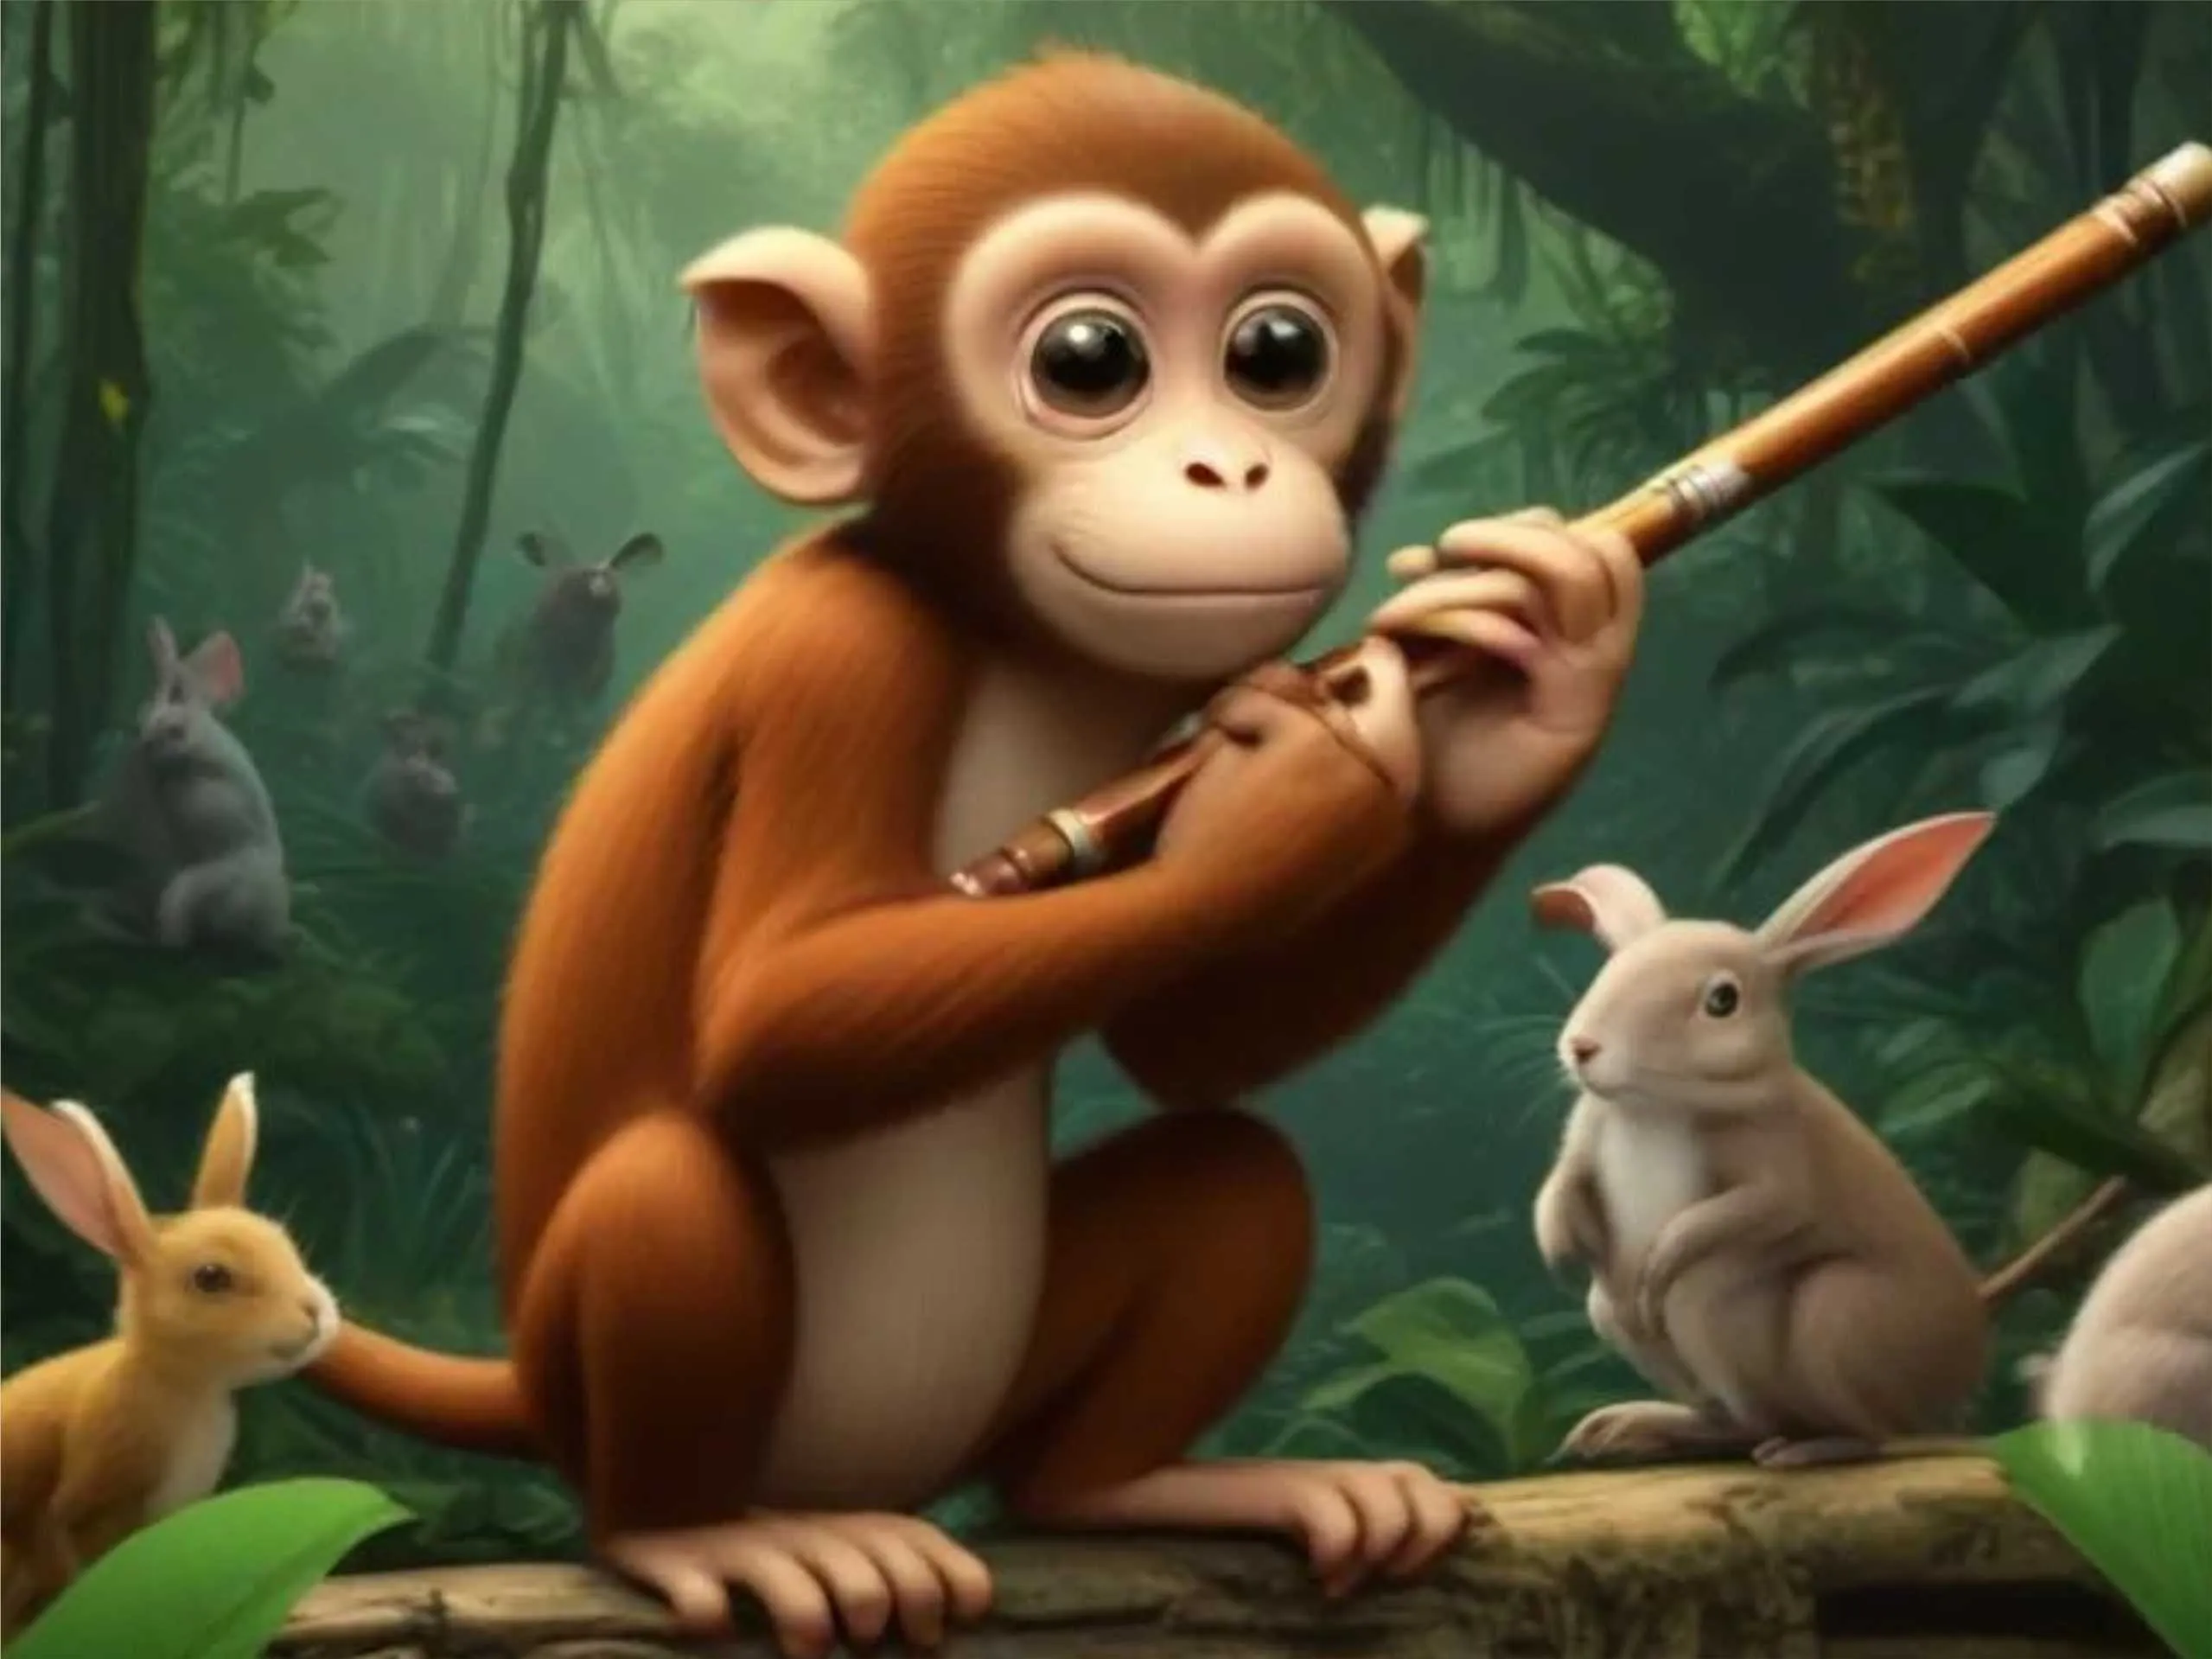 Monkey with a flute in hand cartoon image